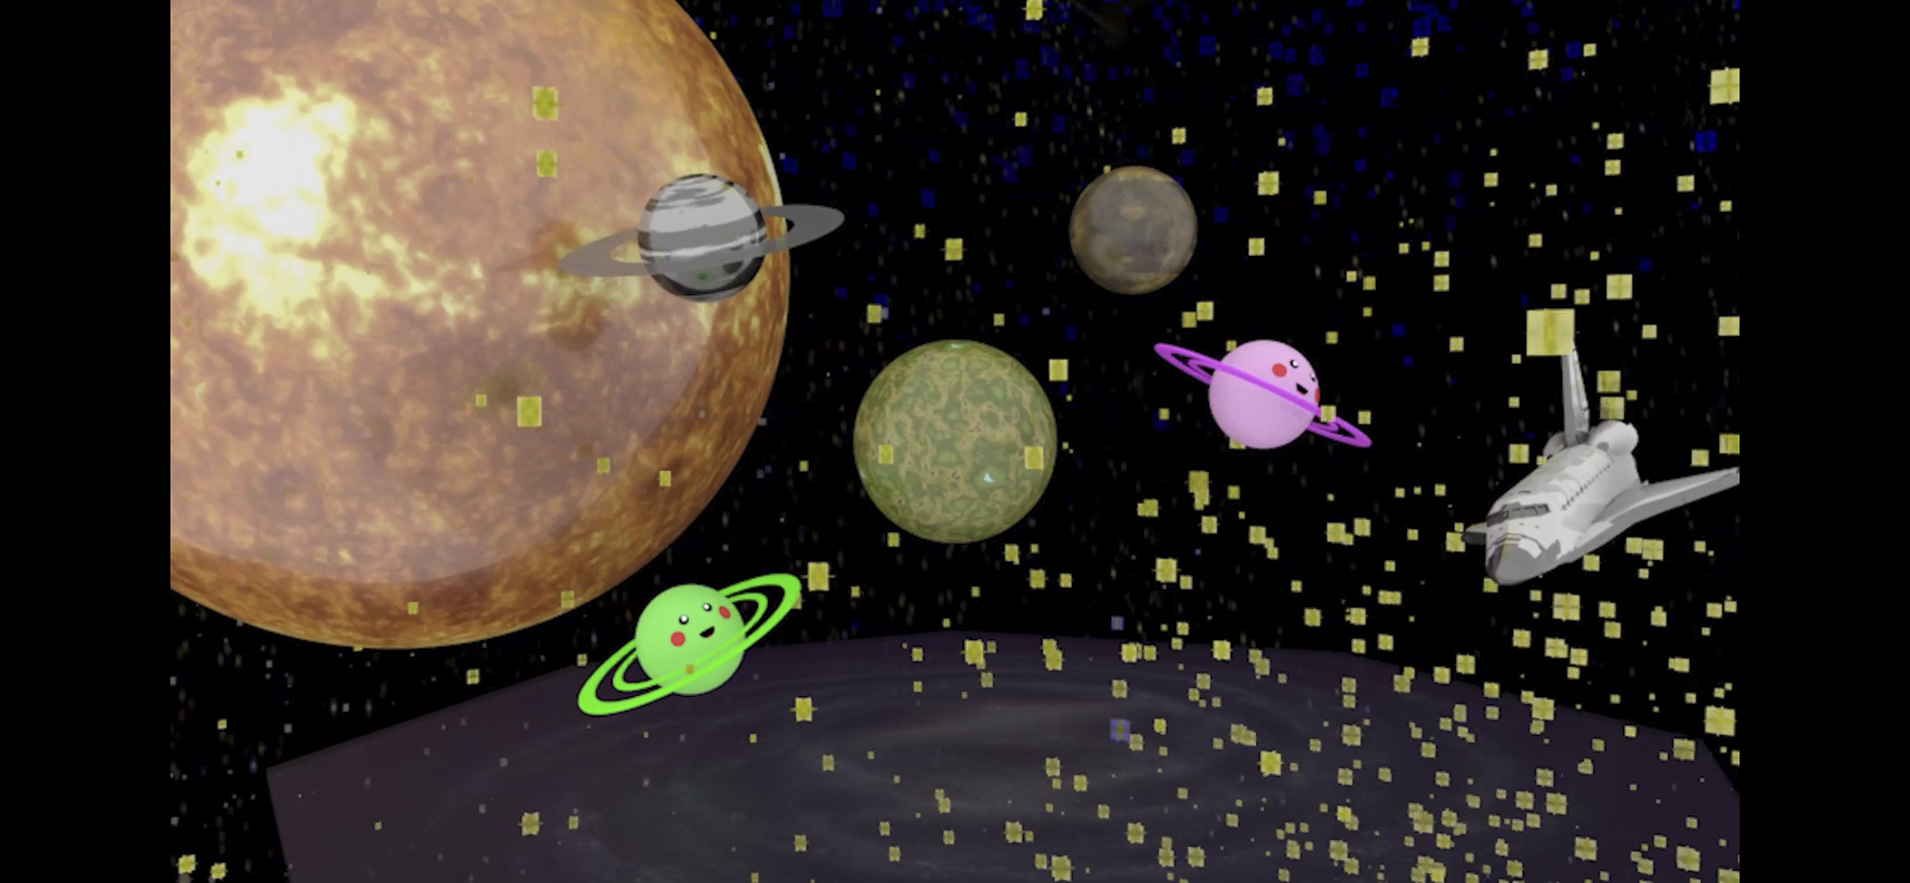 Still from a digital animation showing the solar system and a space shuttle